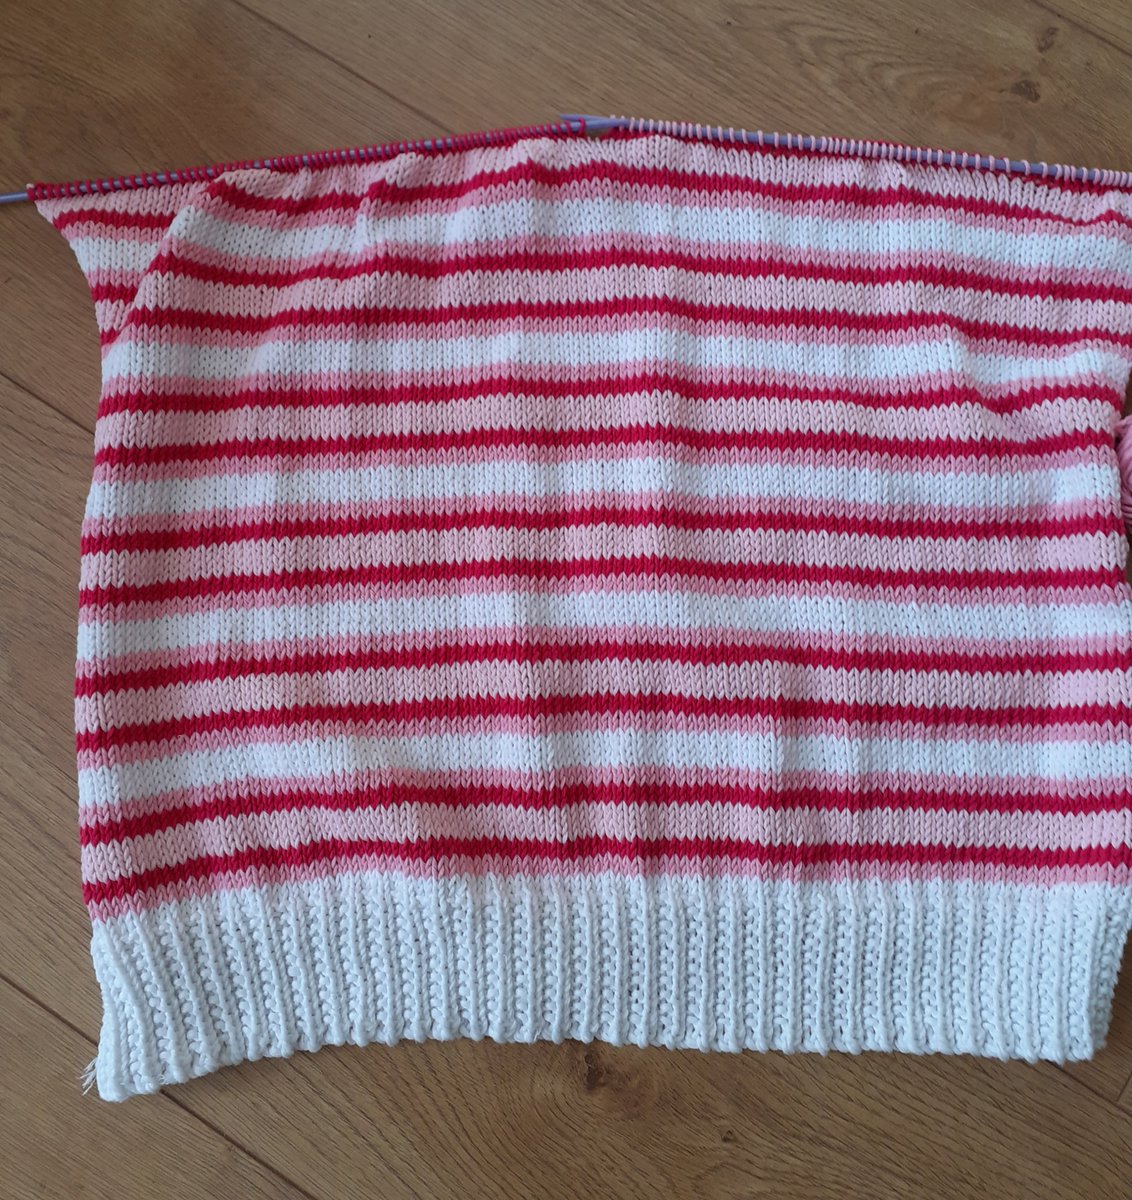 P'nawn Da #welshcrafthour Working on a cotton sweater for myself for cooler summer days. A strawberries and cream palette🍓! I haven't decided what the neckline should look like yet - need to decide that soon. Just a plain crew neck given the stripey pattern, or maybe a collar?